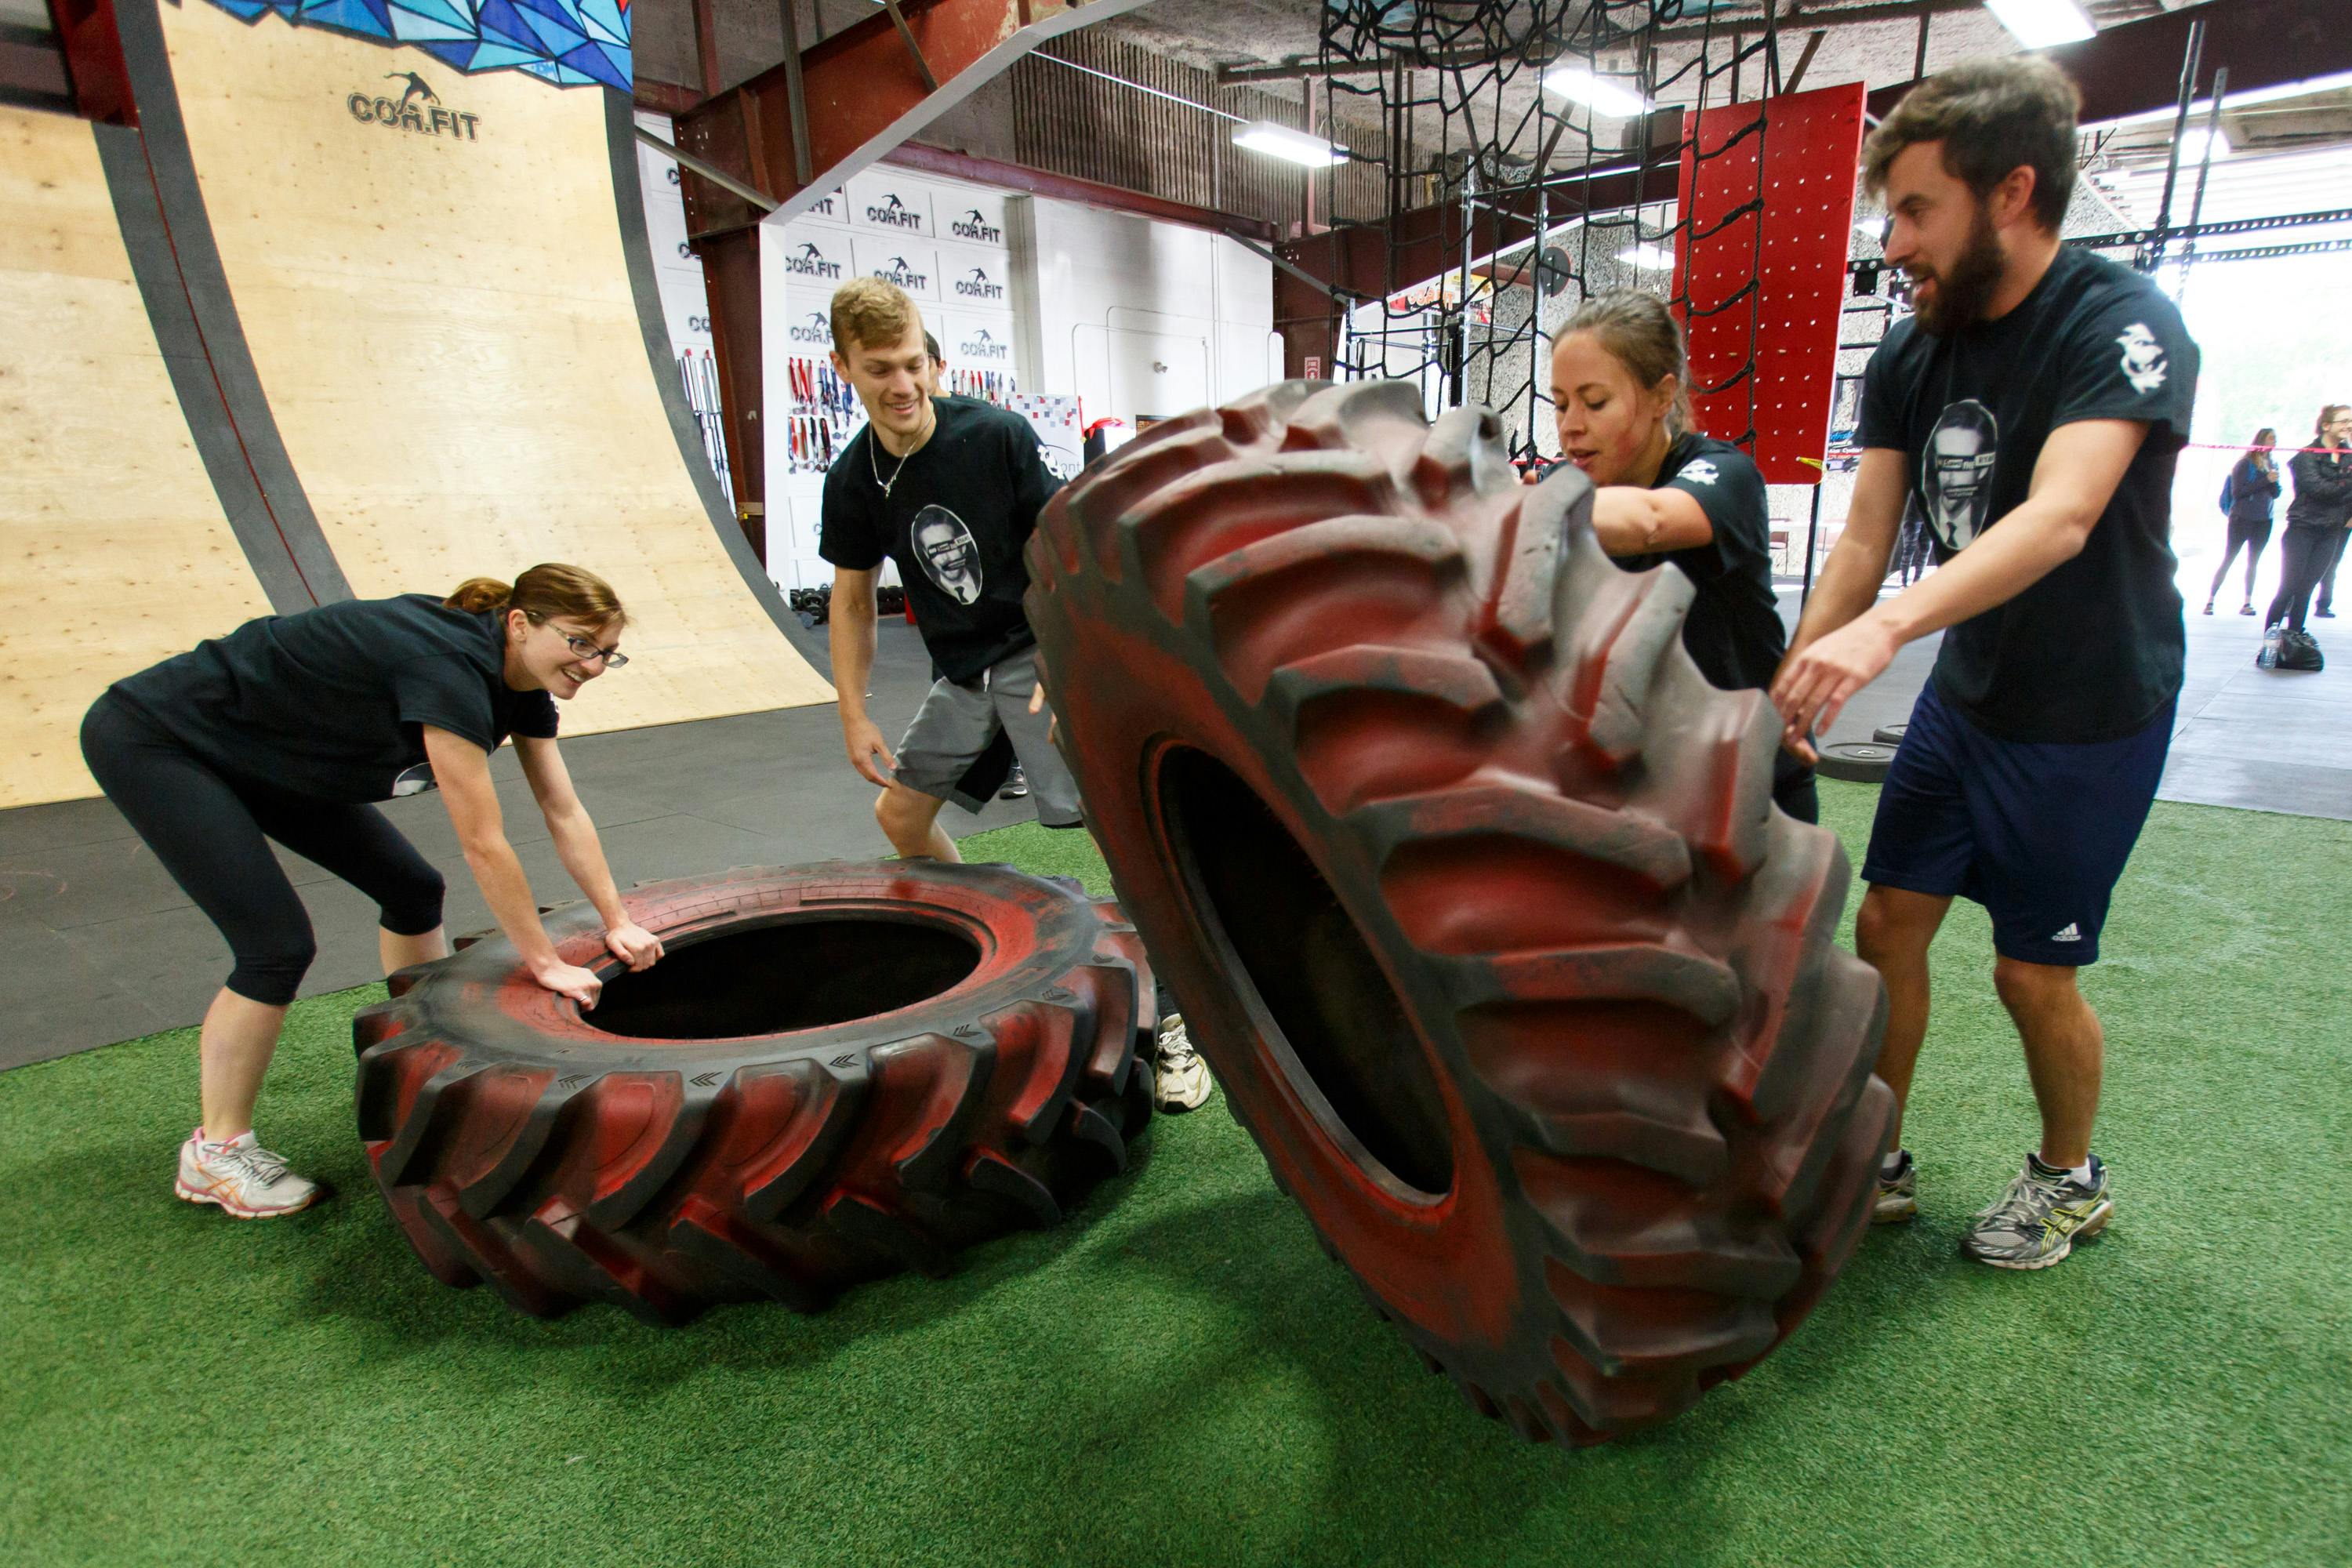 Team of 4 flip heavy tires in the obstacle course race event